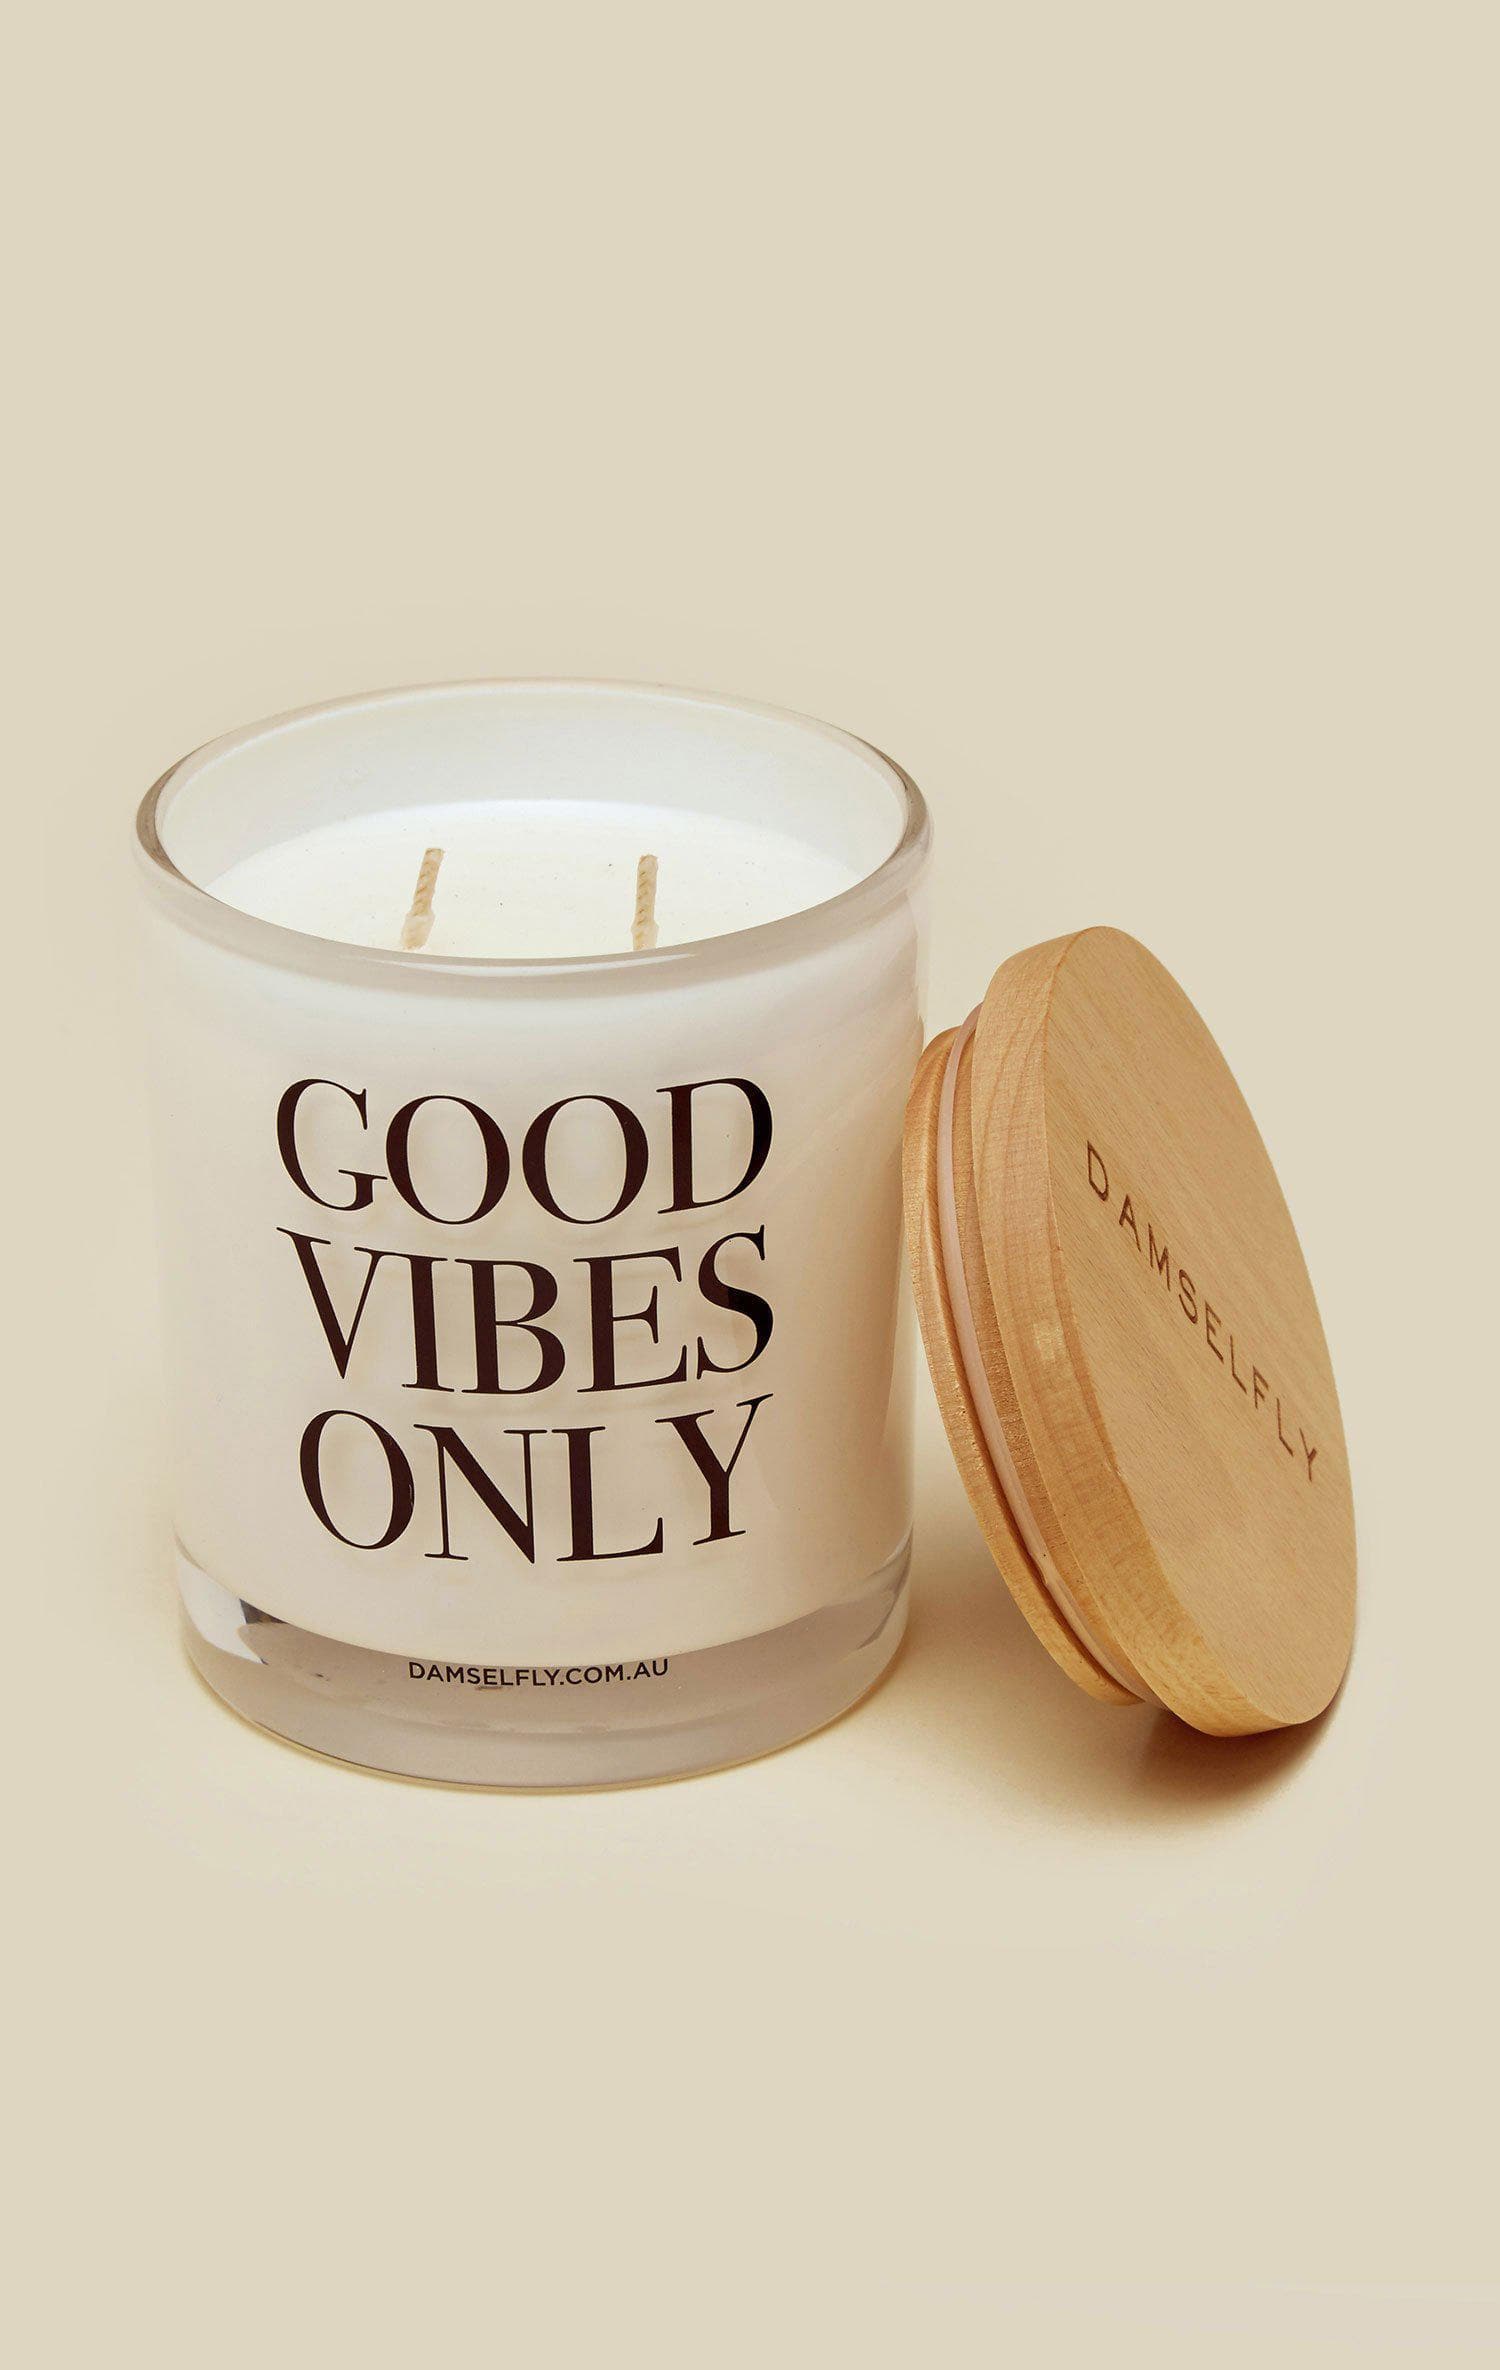 DAMSELFLY GOOD VIBES ONLY CANDLE - WHITE